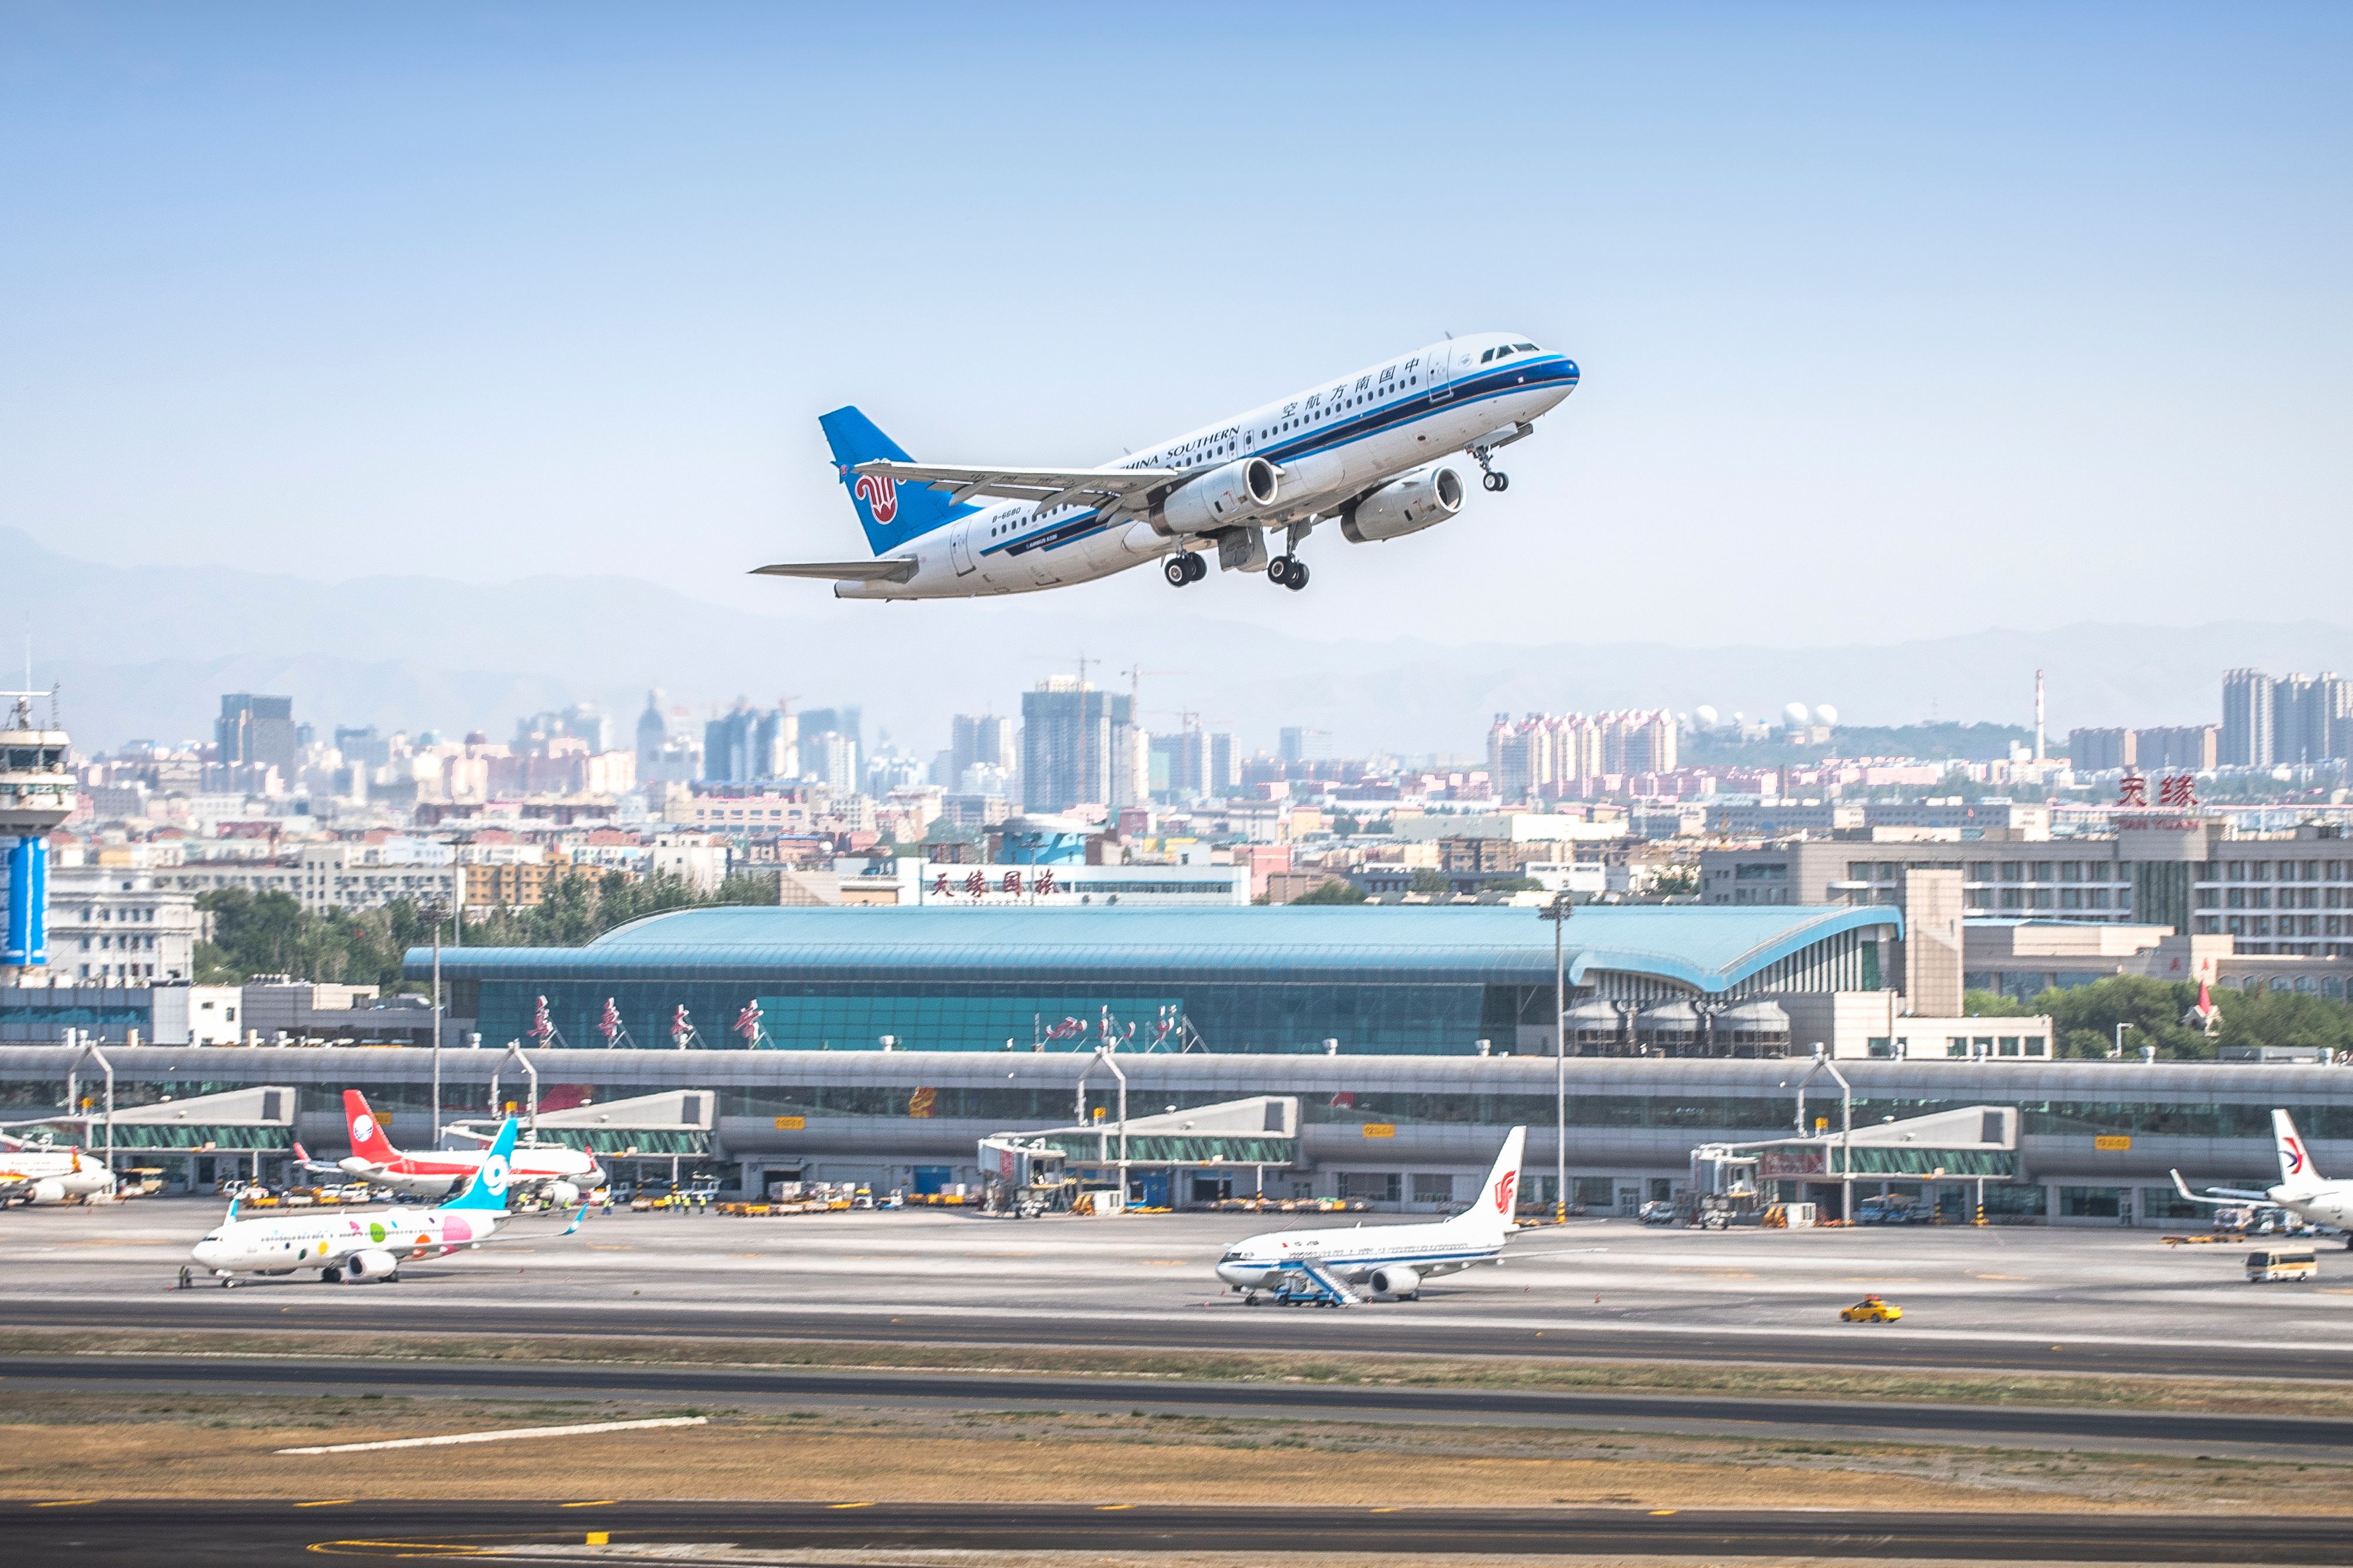 A China Southern Airlines Airbus A320 flight lands at Urumqi Diwopu International Airport.